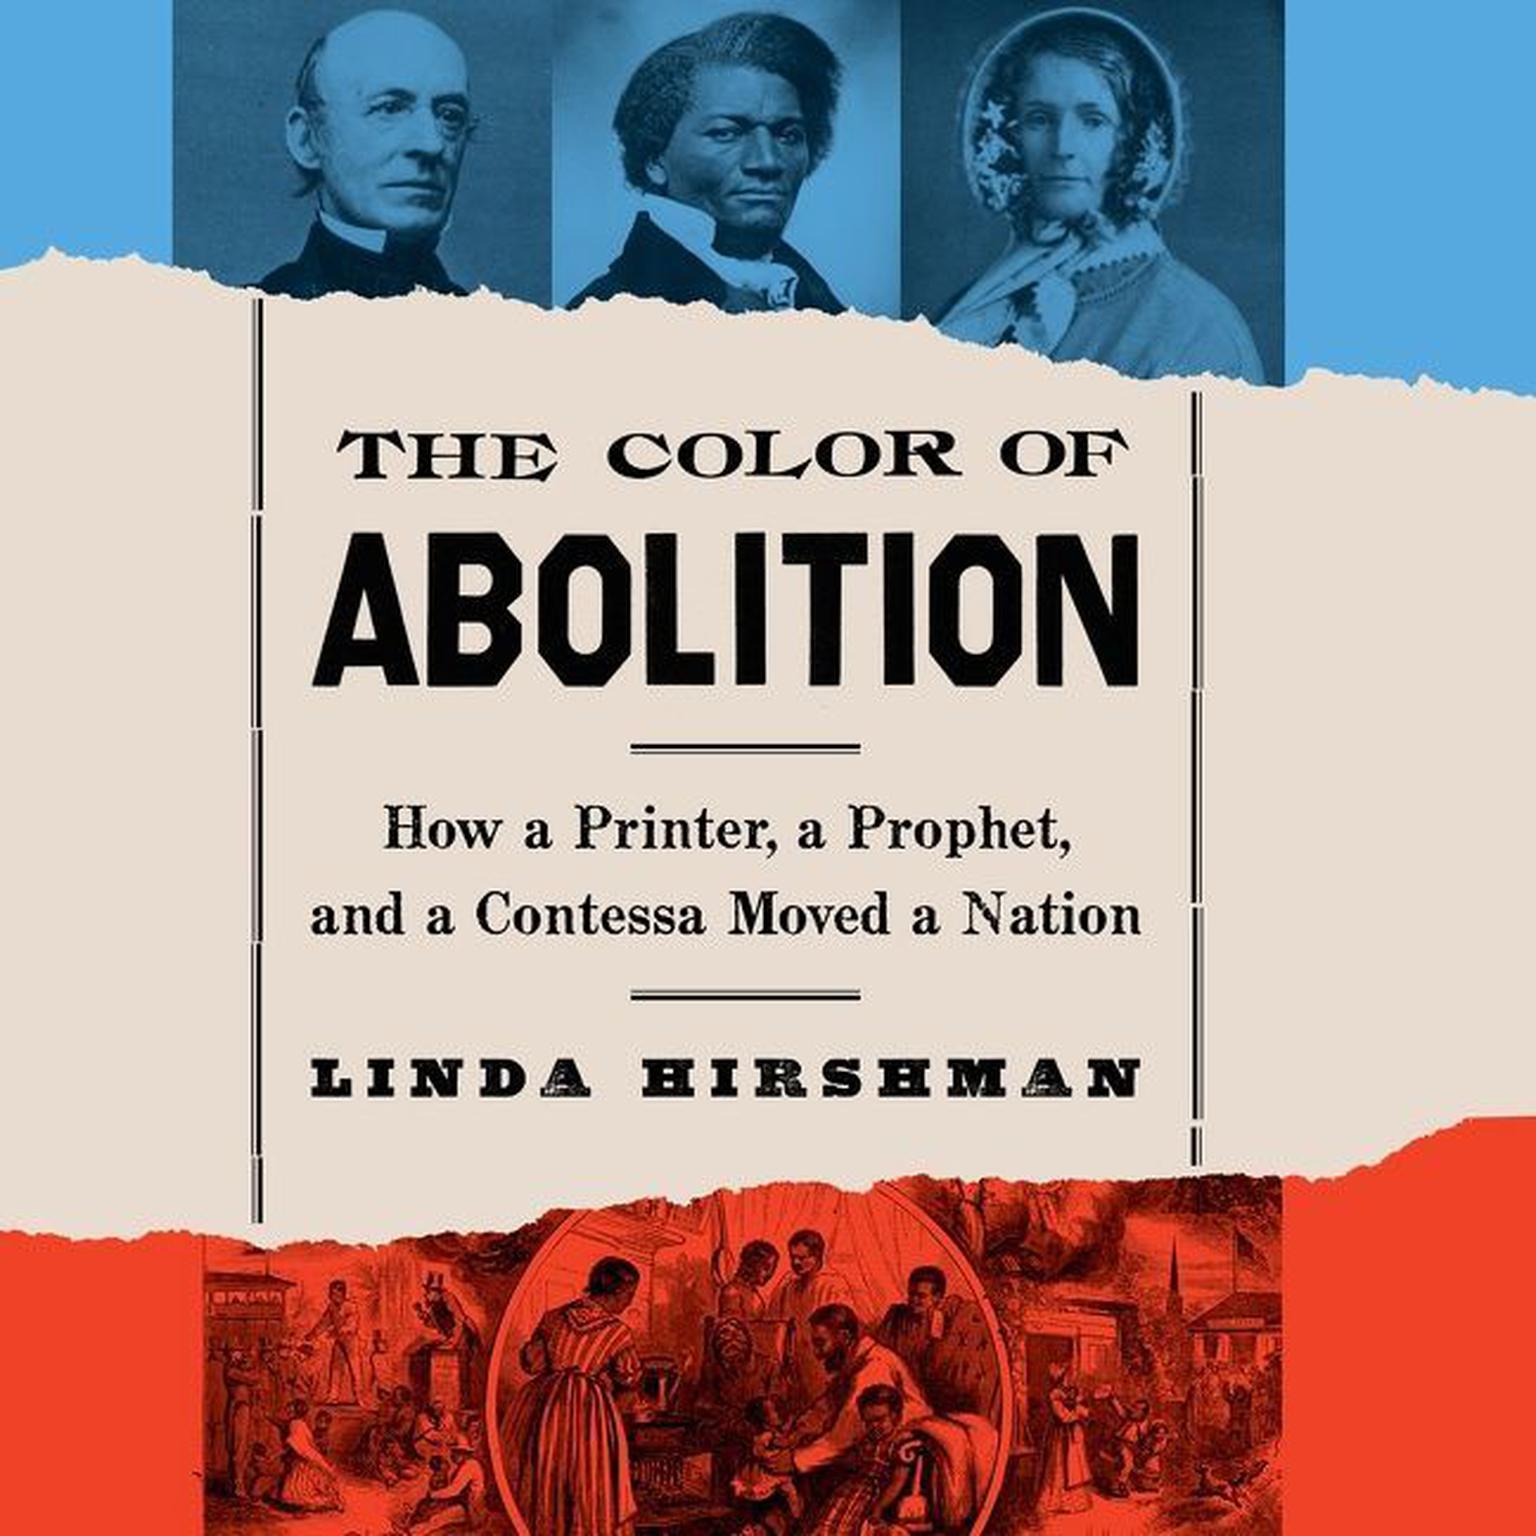 The Color of Abolition: How a Printer, a Prophet, and a Contessa Moved a Nation Audiobook, by Linda Hirshman